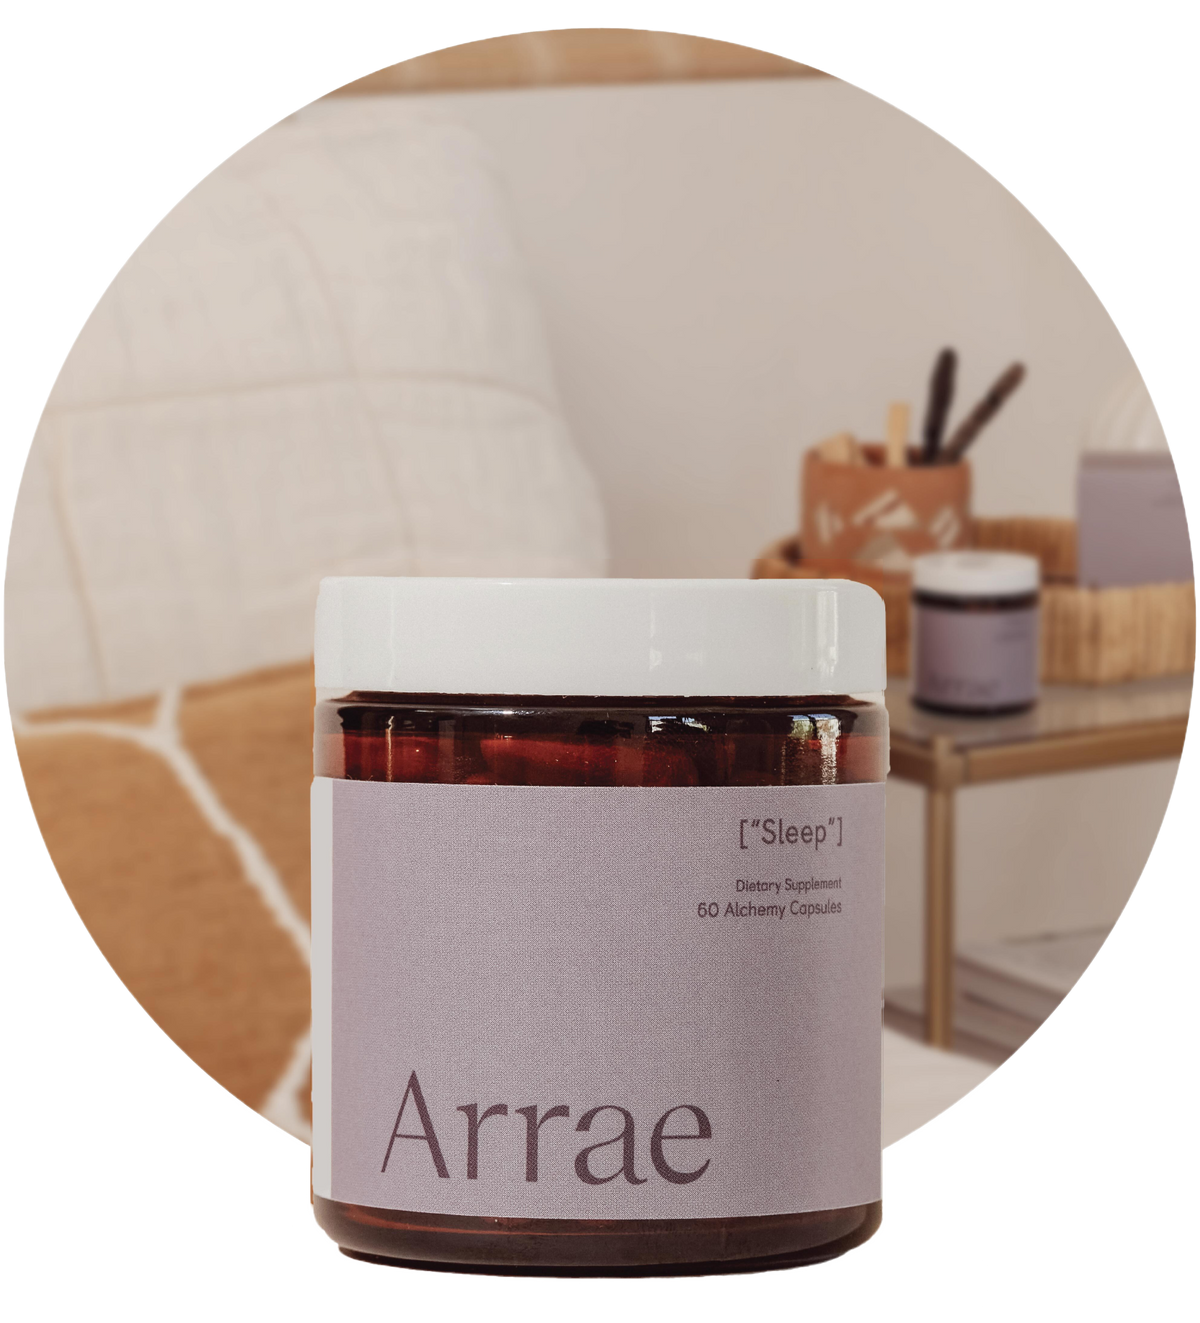 Arrae Sleep Supplement - A bottle of 60 capsules featuring a blend of natural ingredients, designed to promote restful sleep and relaxation without melatonin